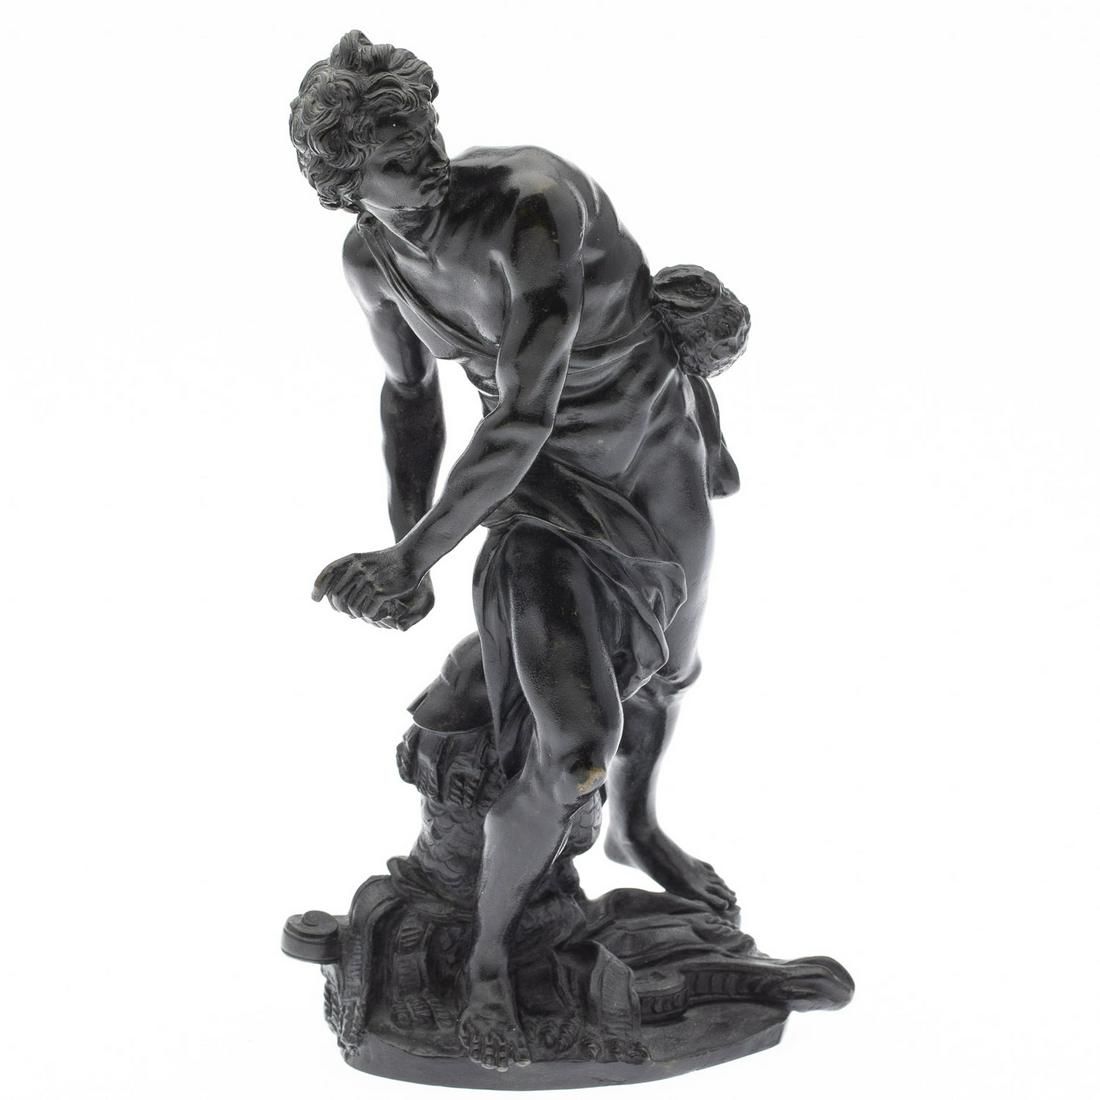 DISCUS THROWER, AFTER THE ANTIQUE,